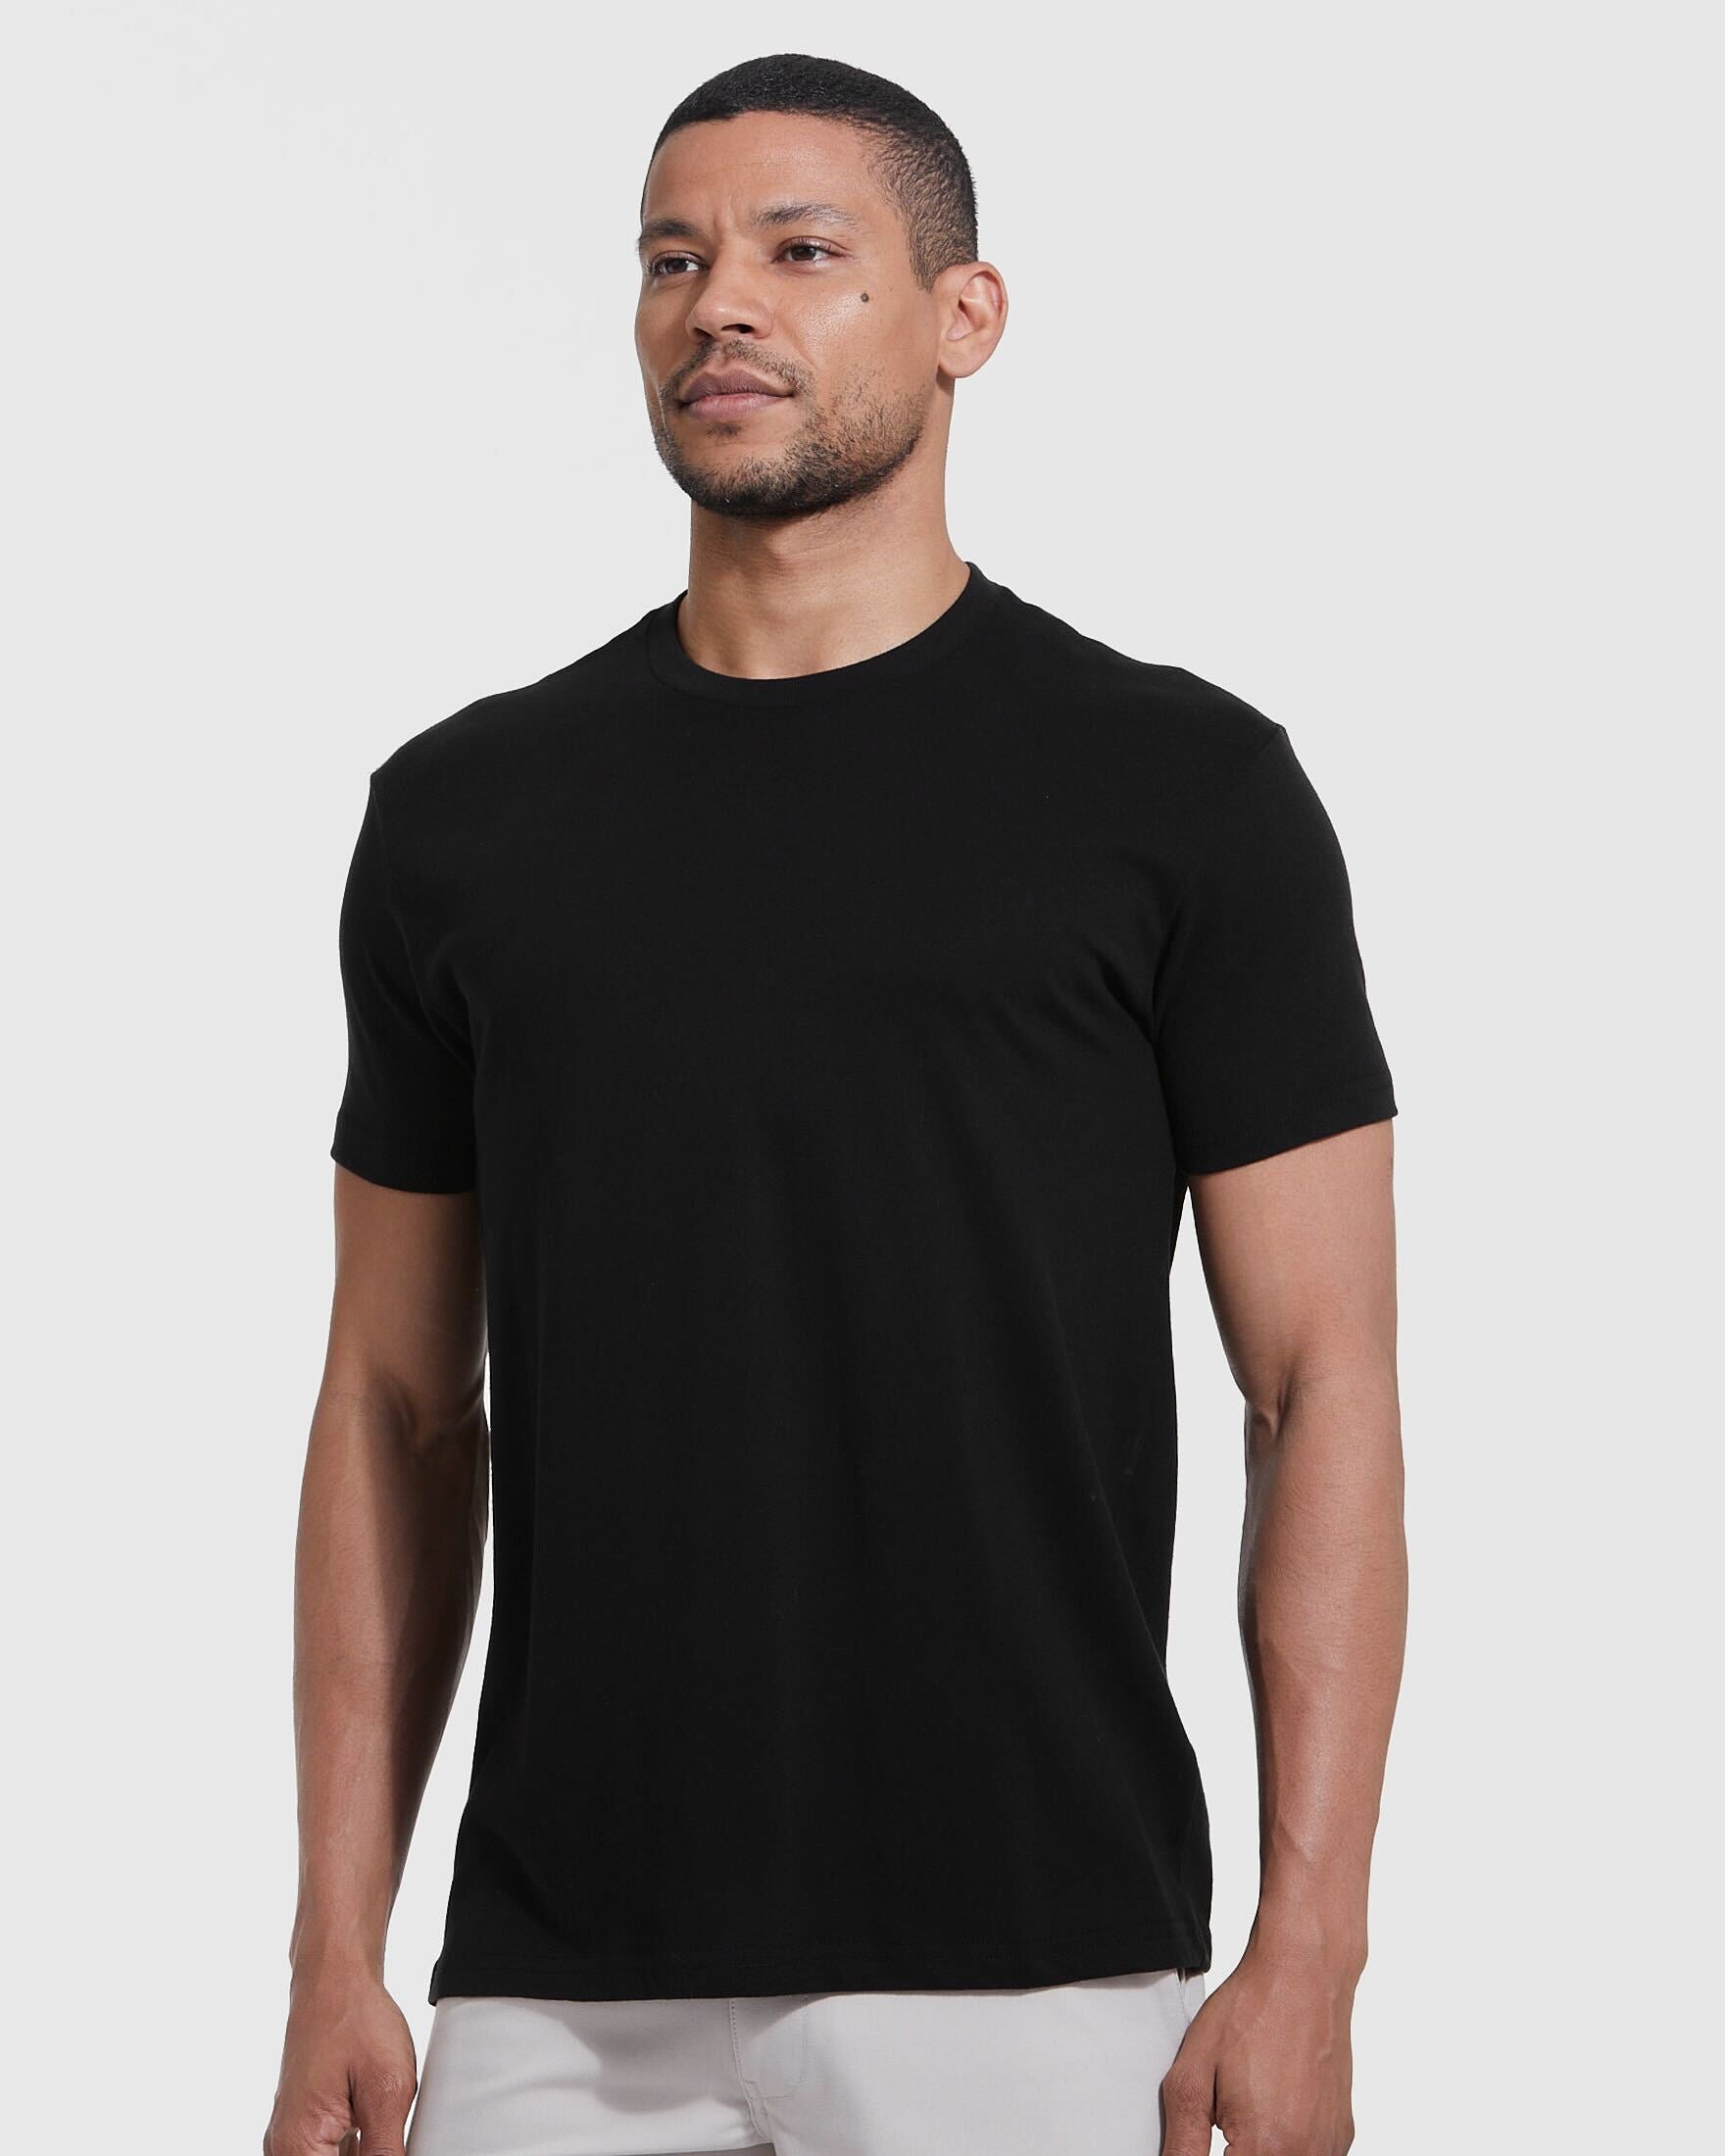 Basic Black Cotton Blend Fitted Crew Neck T Shirt